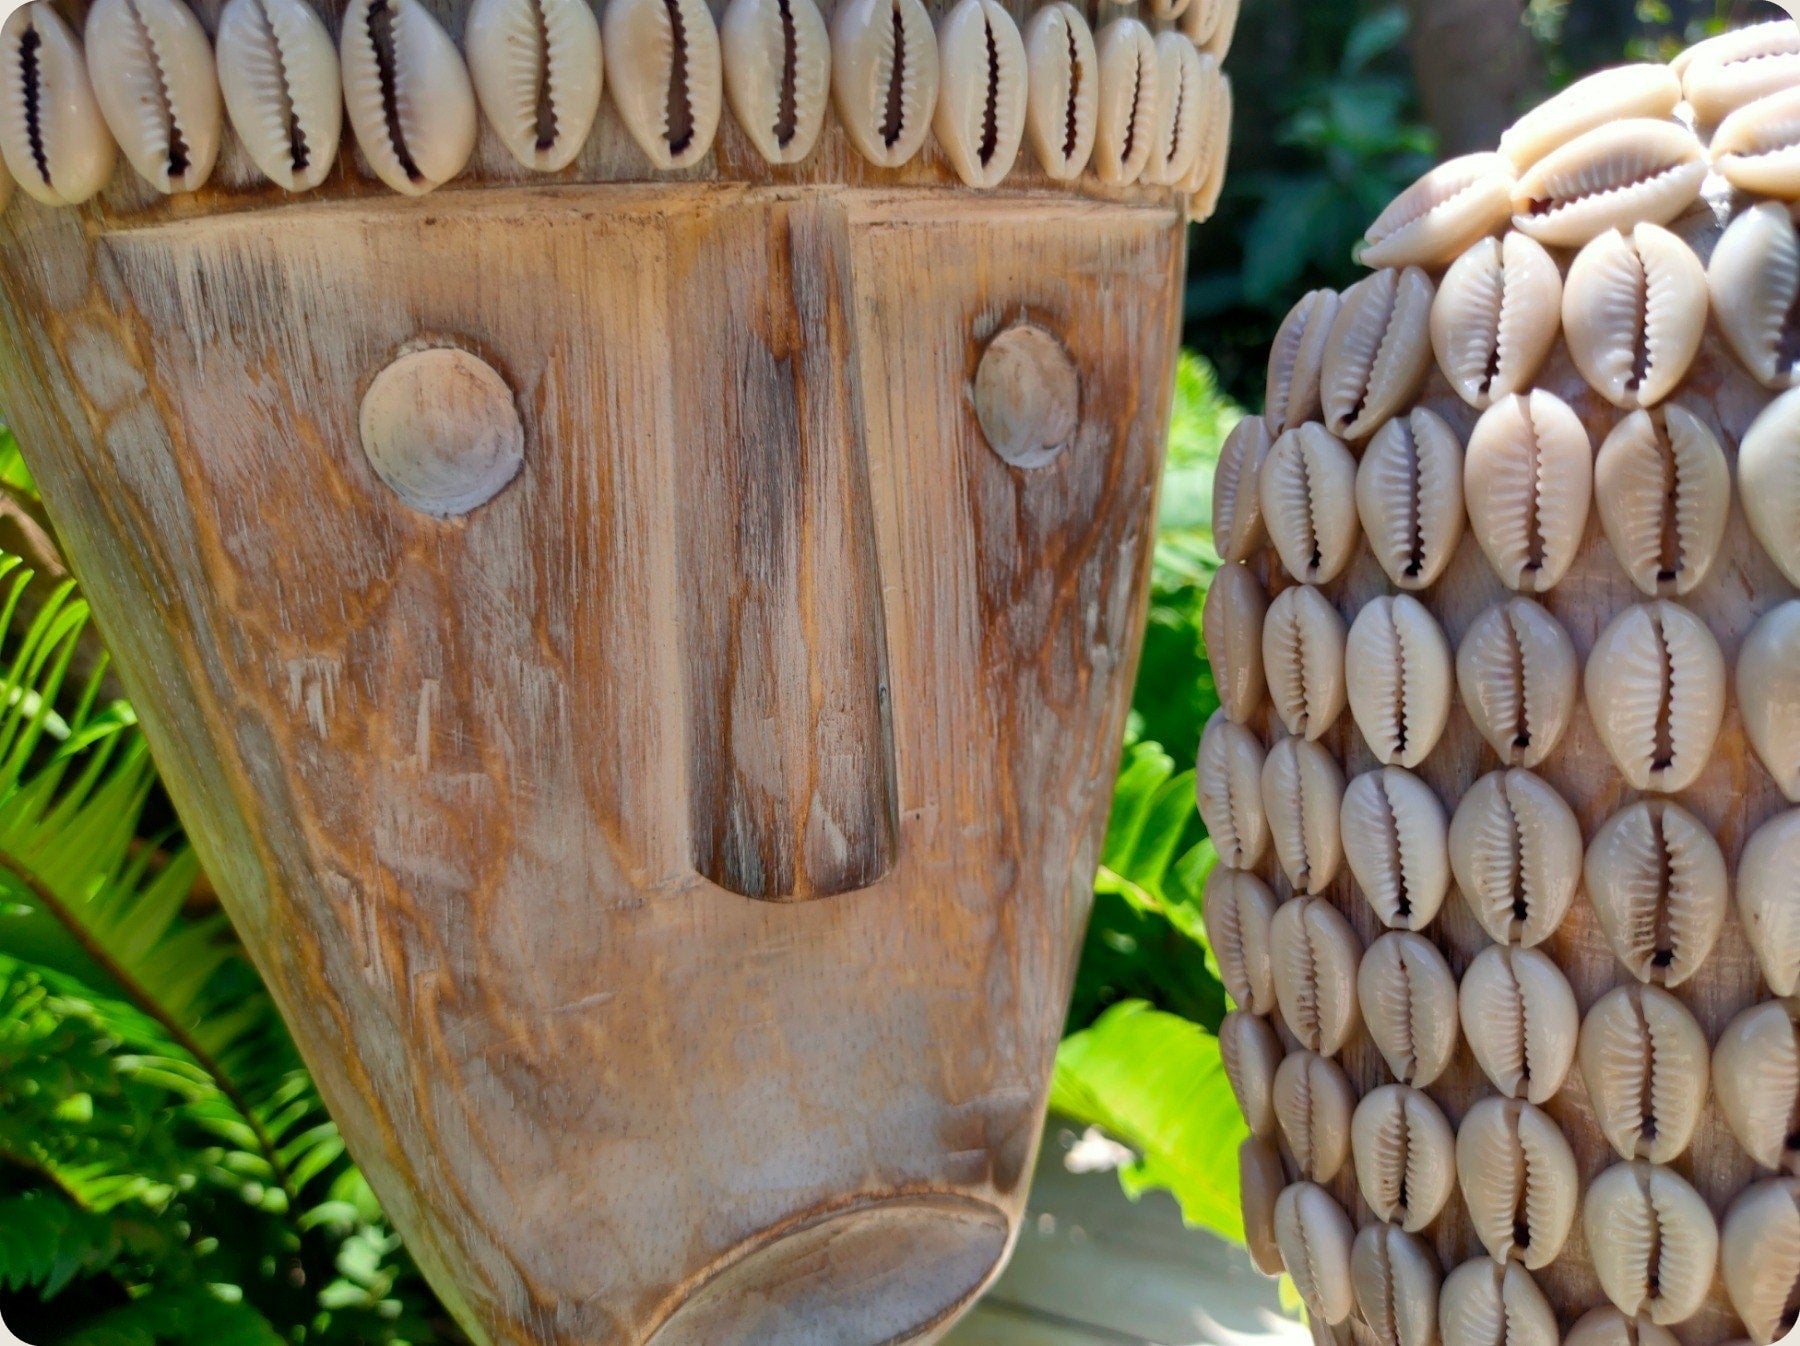 The Wooden Tribal Mask - Primitive Mask - Primitive Decorative Wooden Mask with Shells - Cowrie Shell Mask - Traditional Mask